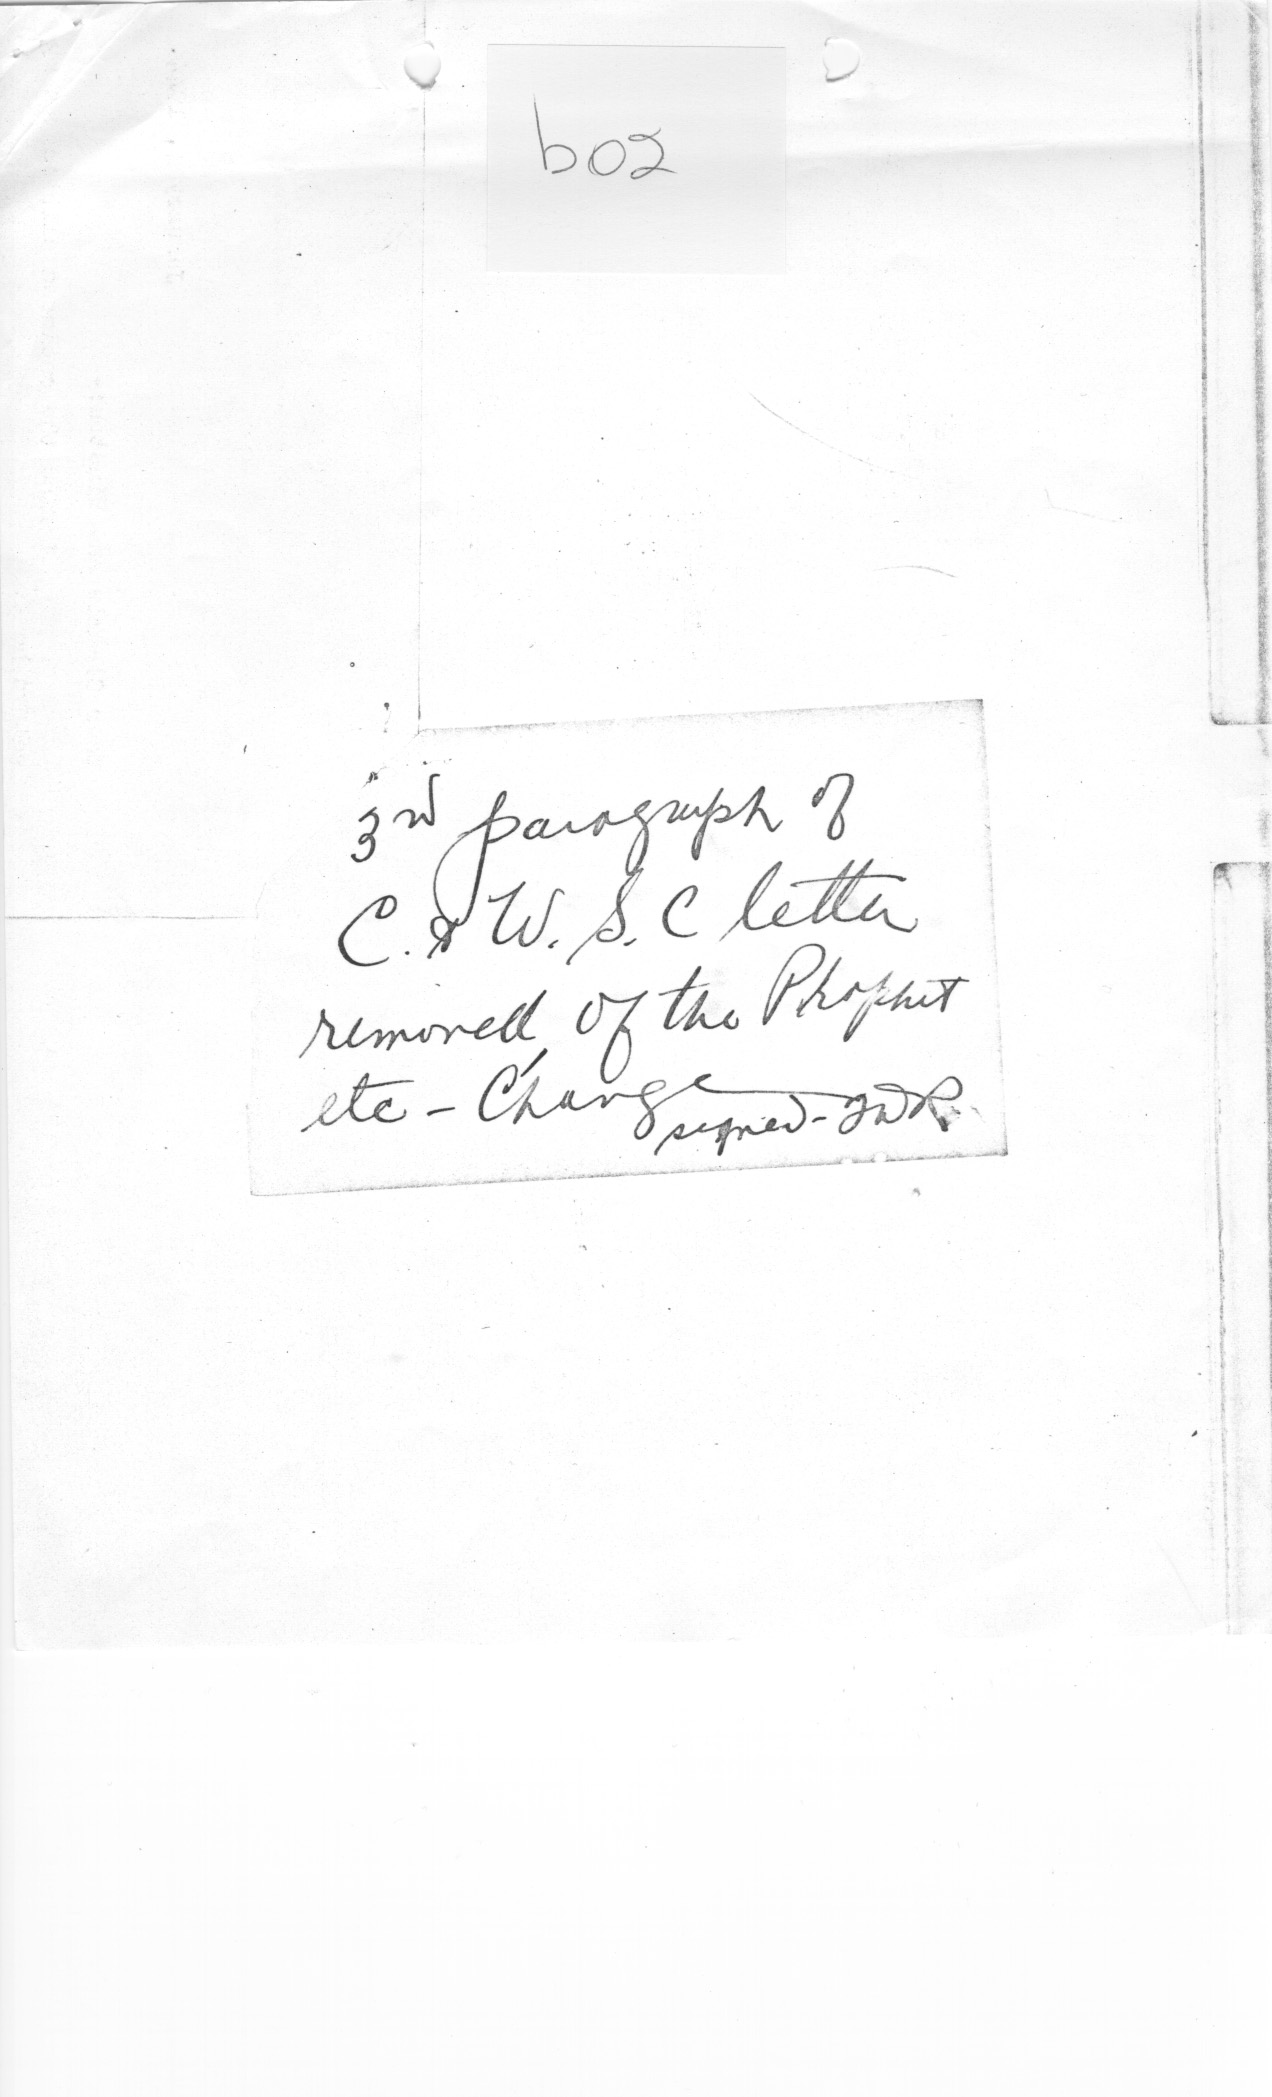 [a335b02.jpg] - Note on letter to Churchills